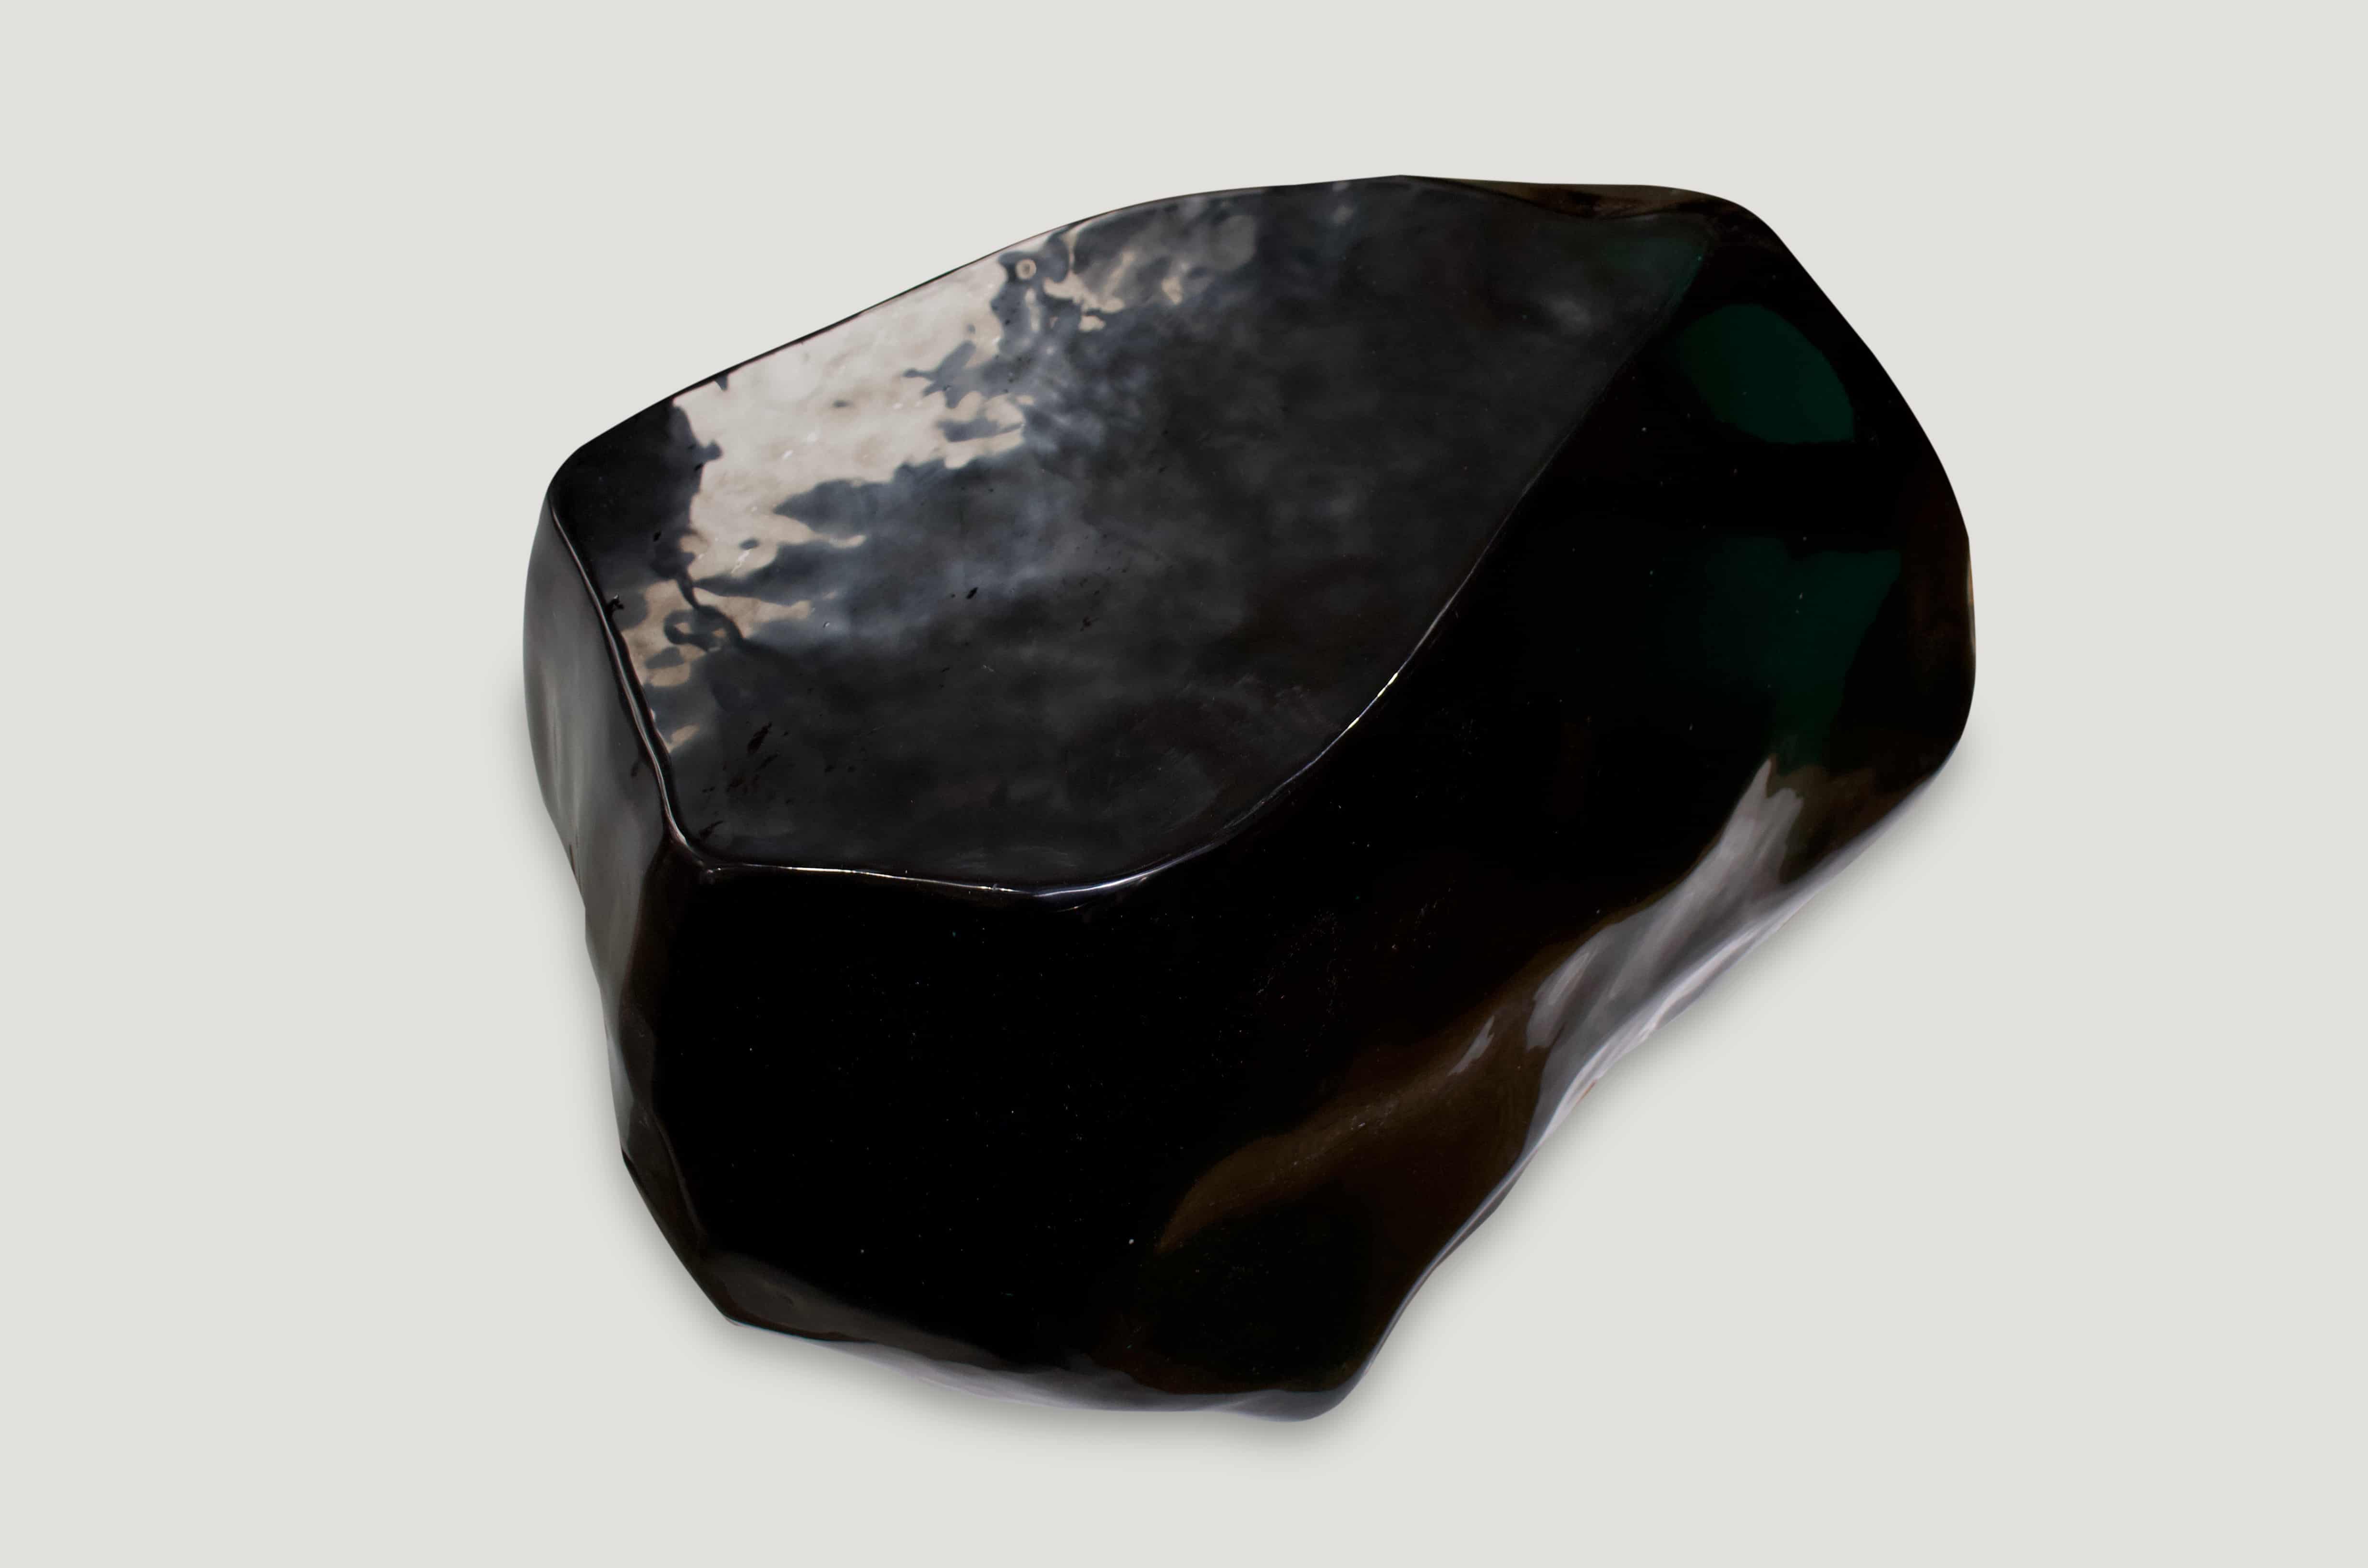 obsidian volcanic glass side table or coffee table